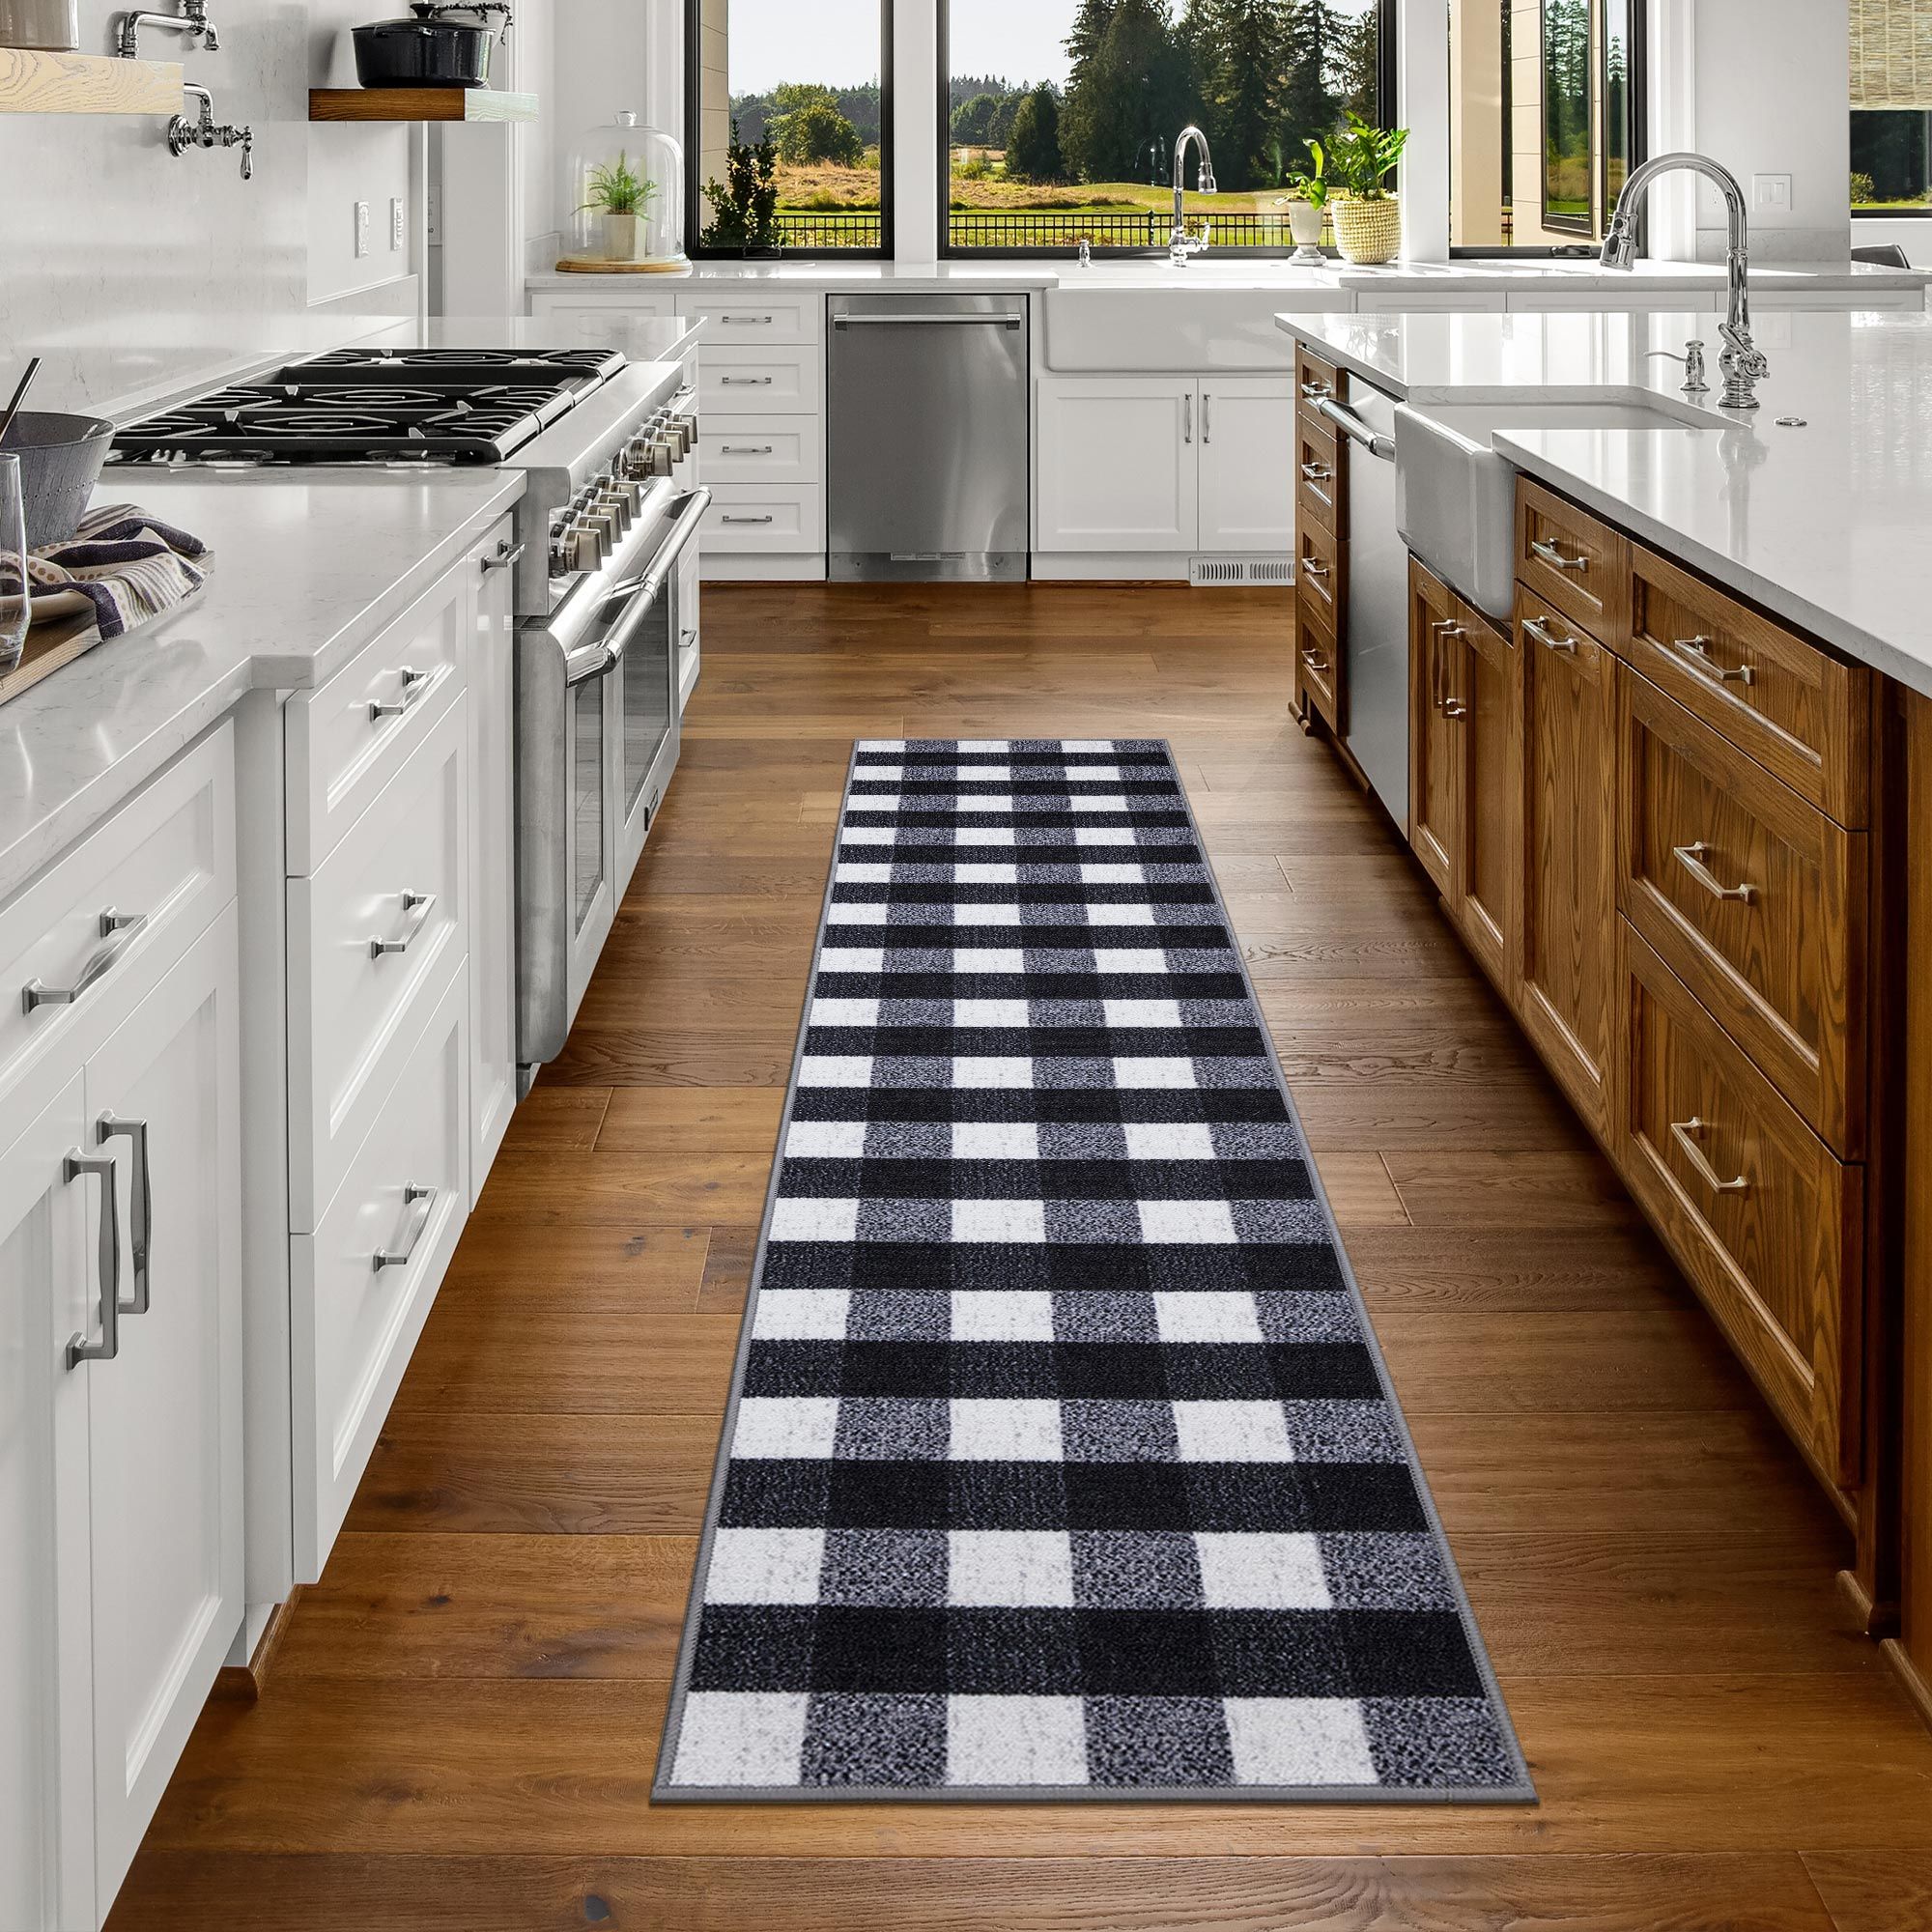 FRAMICS Boho Kitchen Rugs Set 2 Piece, Anti Fatigue Kitchen Mats for Floor,  Kitchen Rugs and